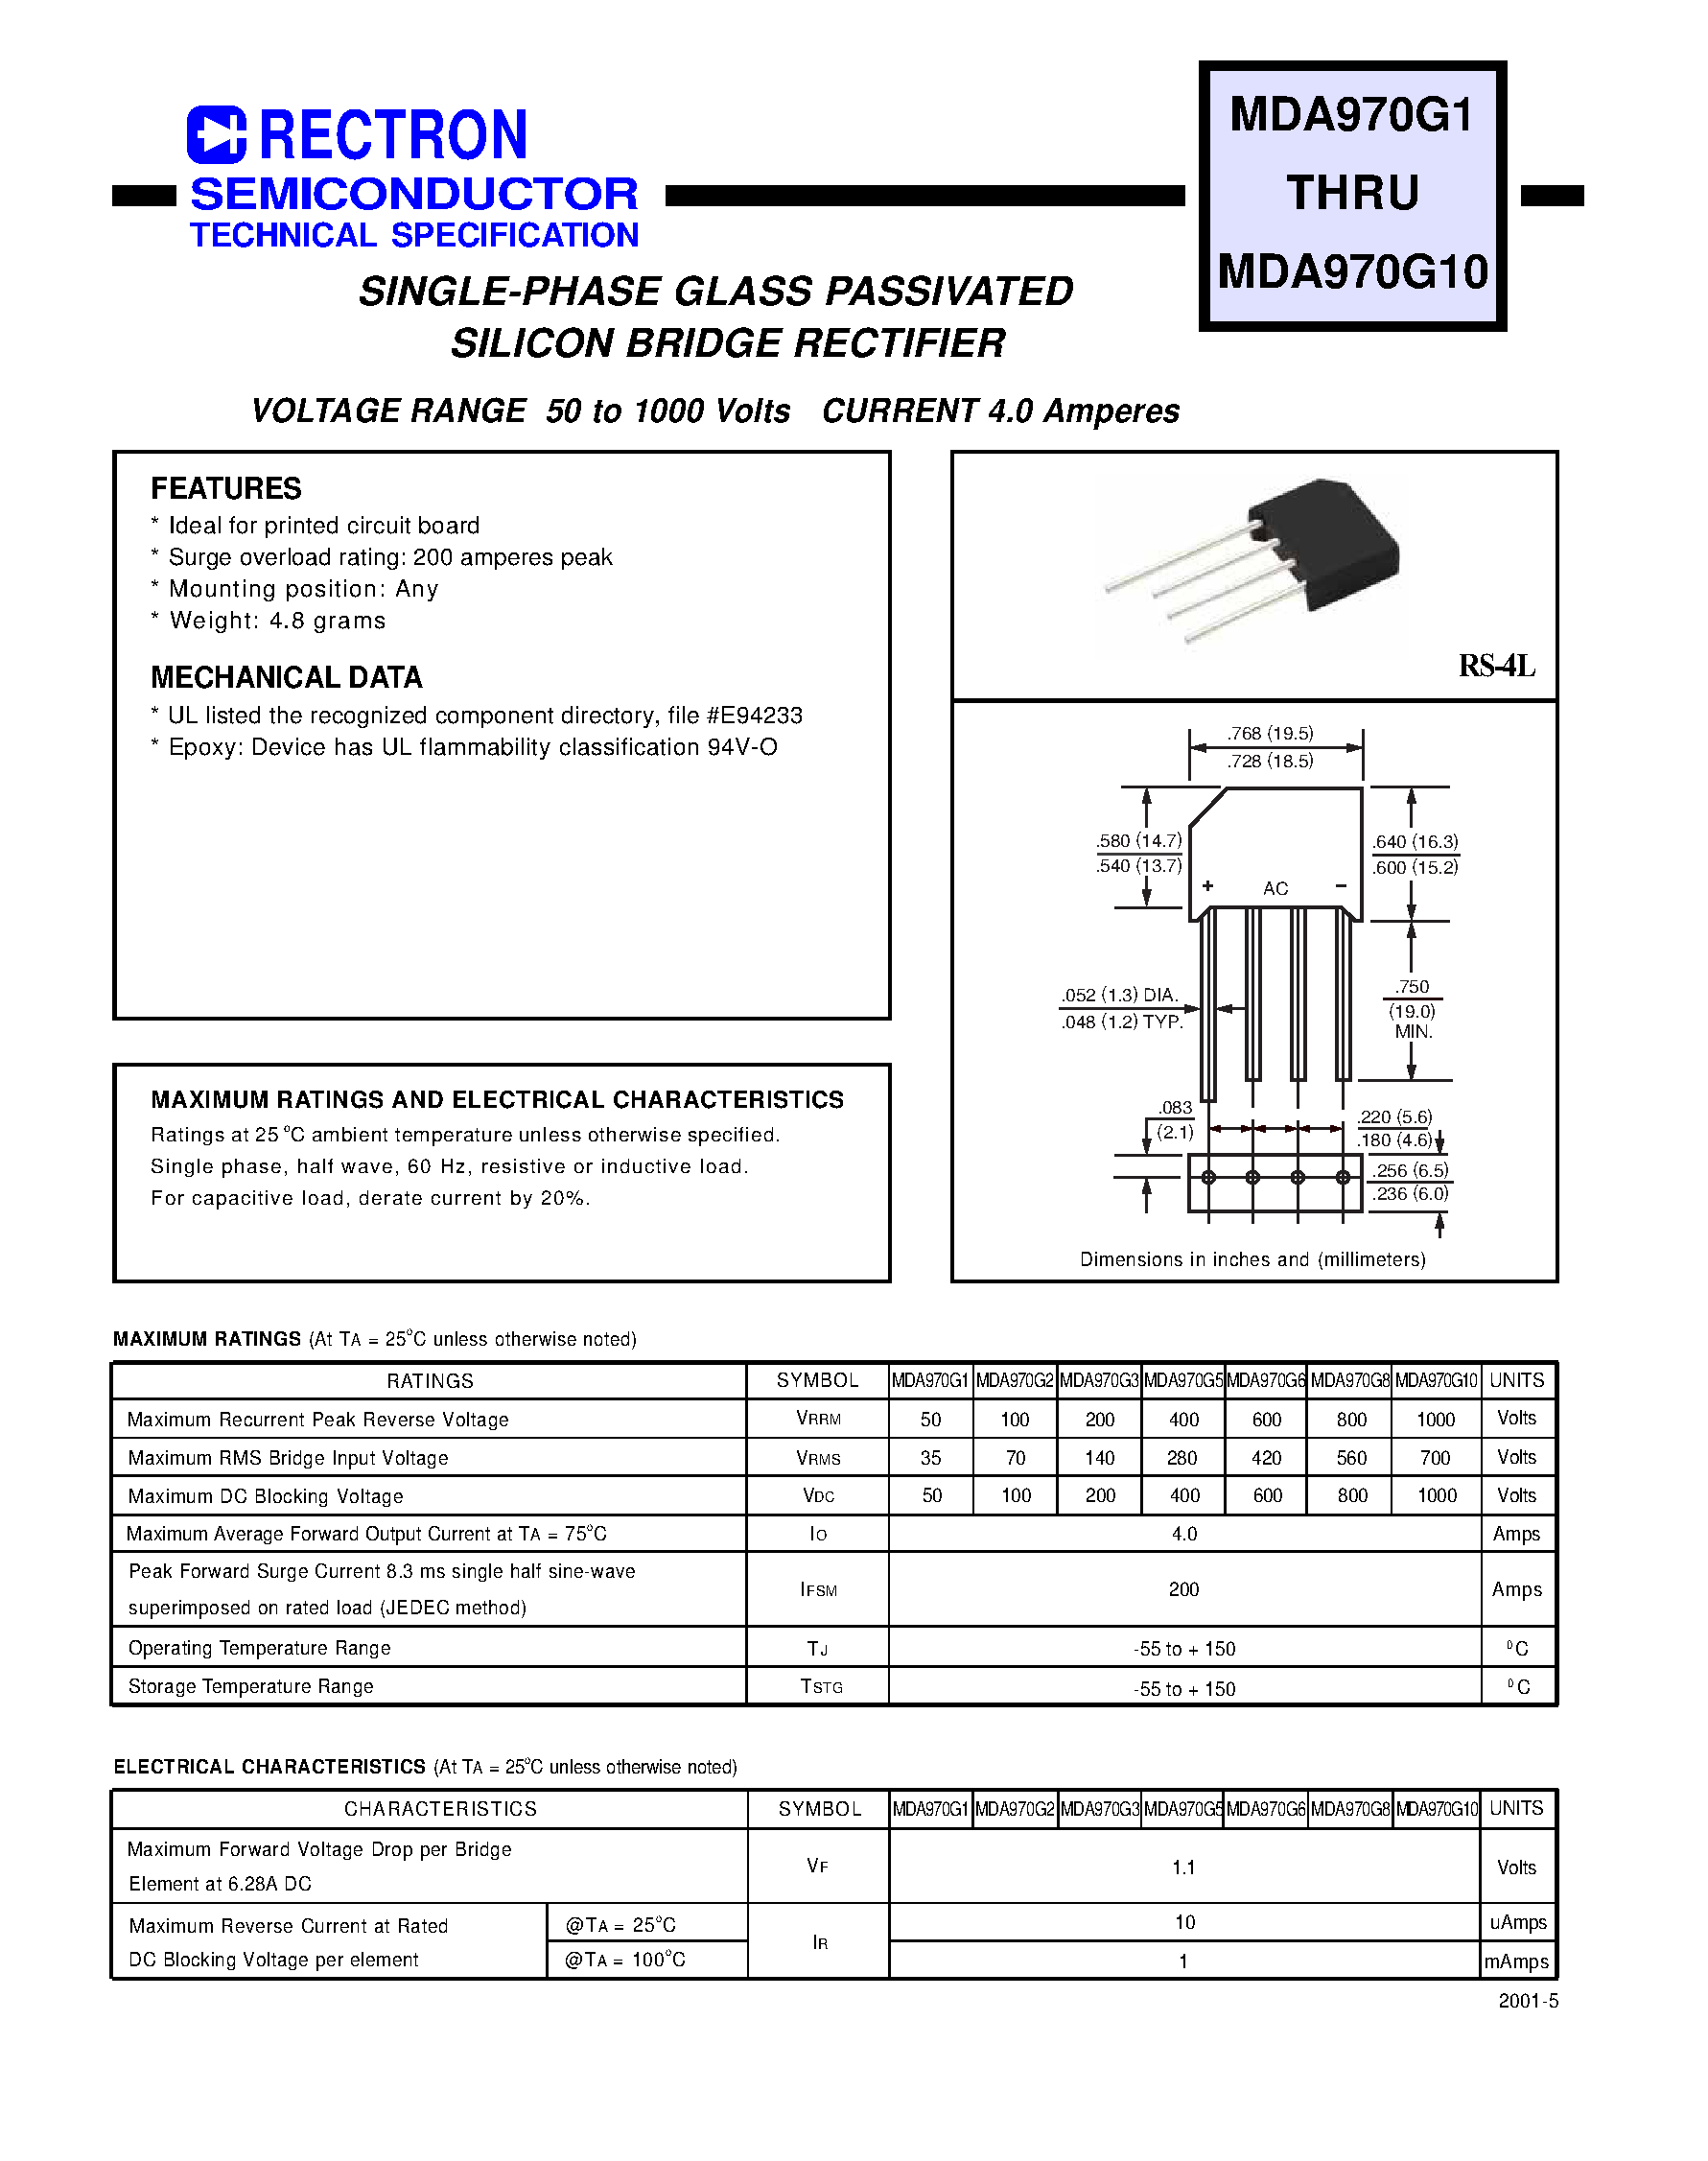 Даташит MDA970G1 - SINGLE-PHASE GLASS PASSIVATED SILICON BRIDGE RECTIFIER (VOLTAGE RANGE 50 to 1000 Volts CURRENT 4.0 Amperes) страница 1